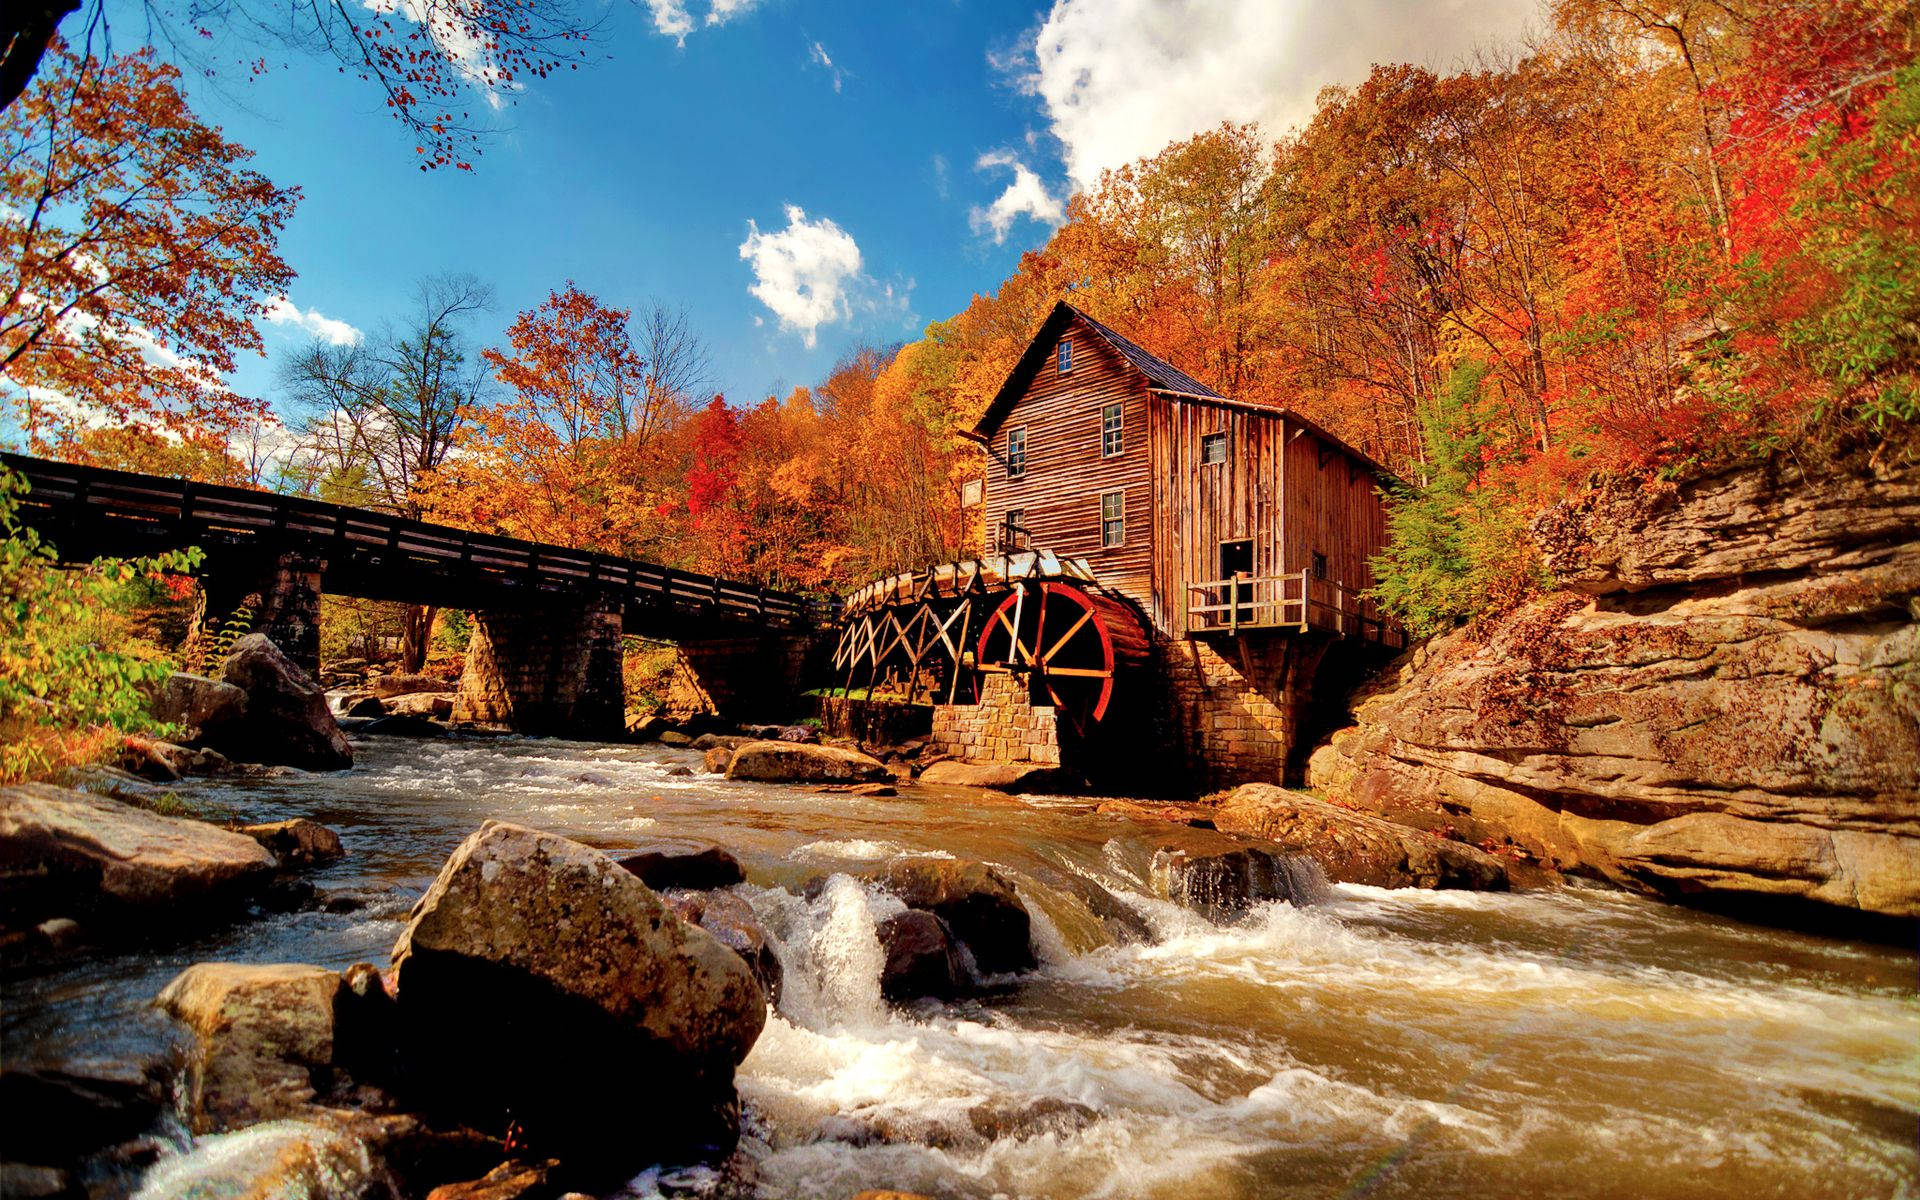 A Scenic Autumn Landscape With River And A Warm House Background